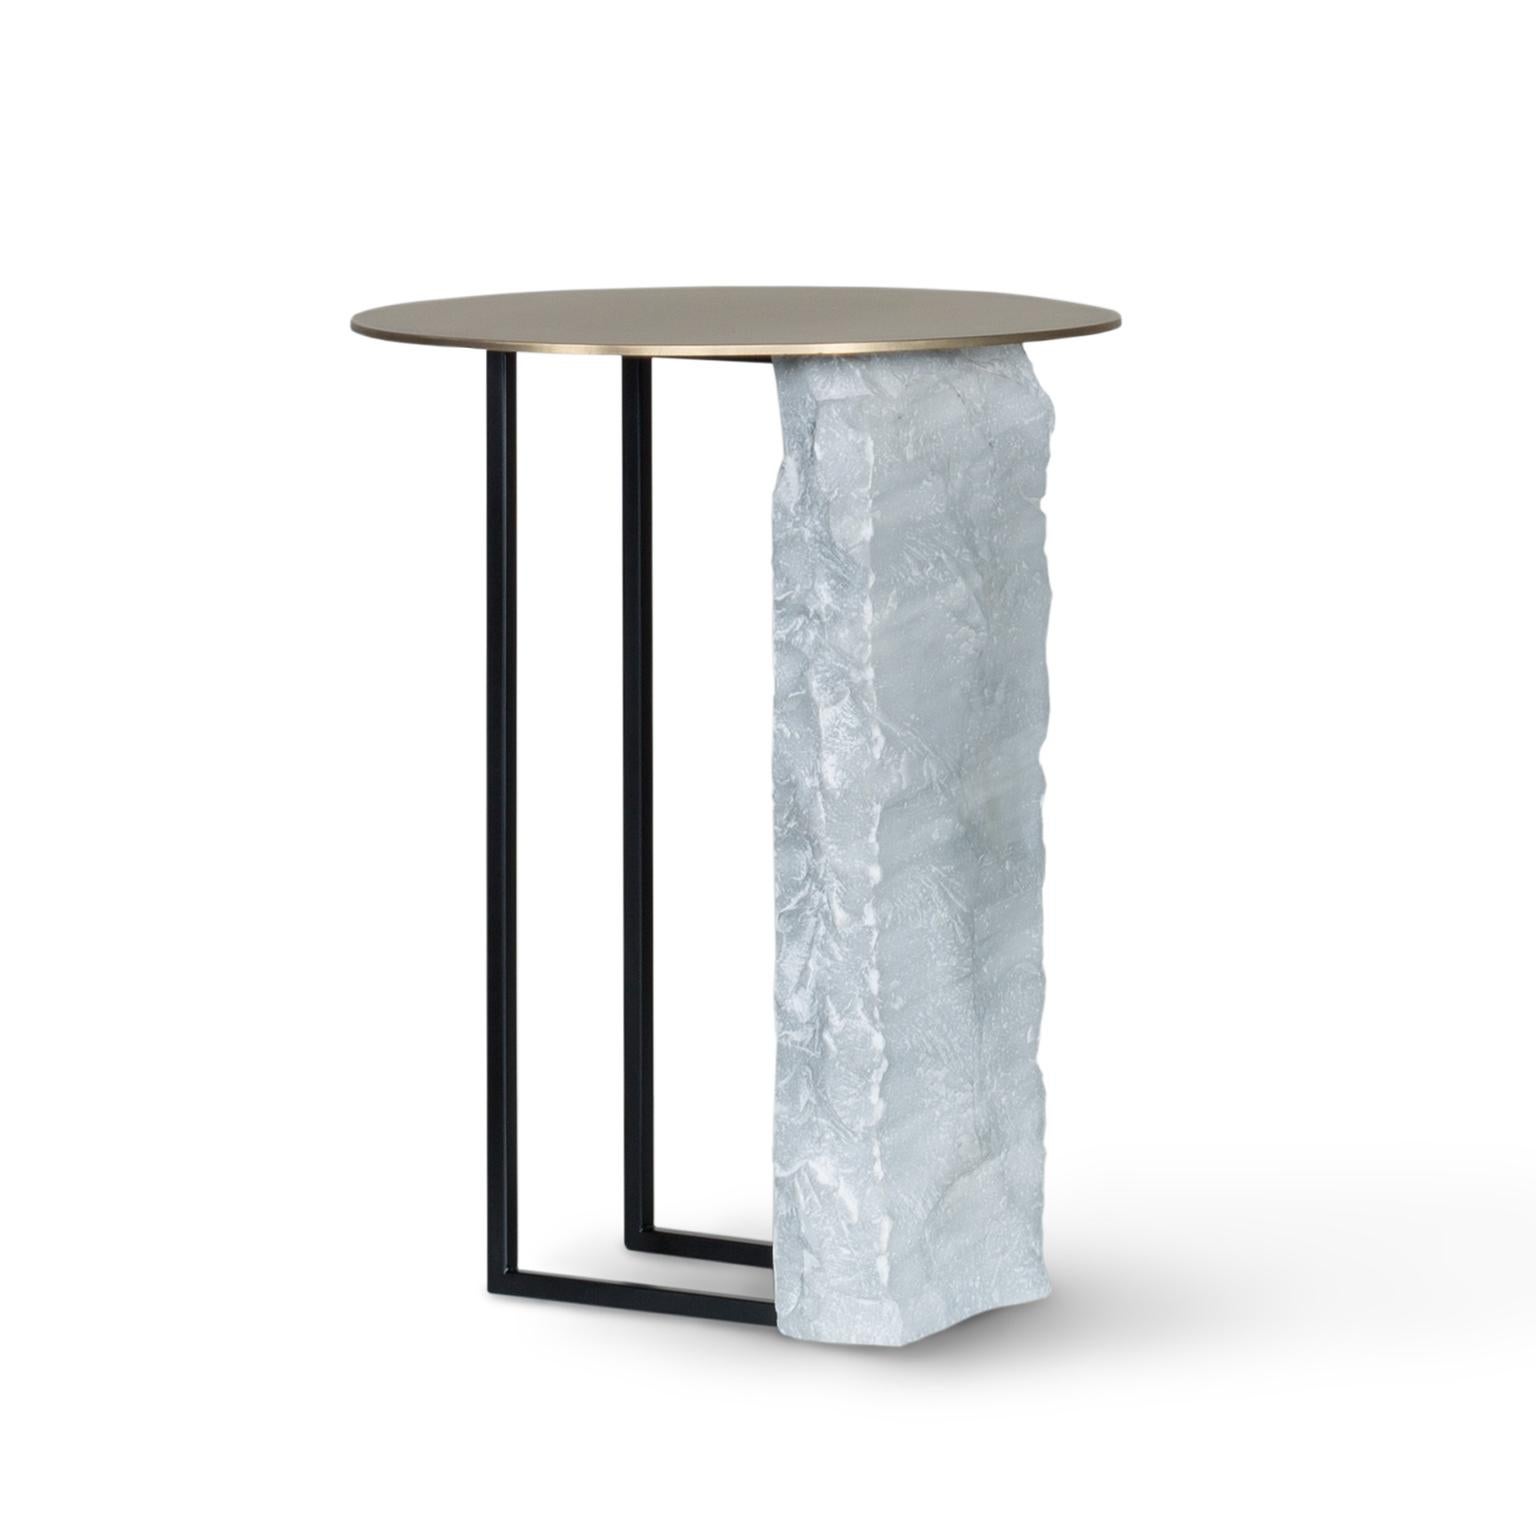 Aire Side Table, Contemporary Collection, Handcrafted in Portugal - Europe by Greenapple.

Designed by Rute Martins for the Contemporary Collection, Aire's bold and irregular aesthetic lends itself perfectly to modern interior design. The